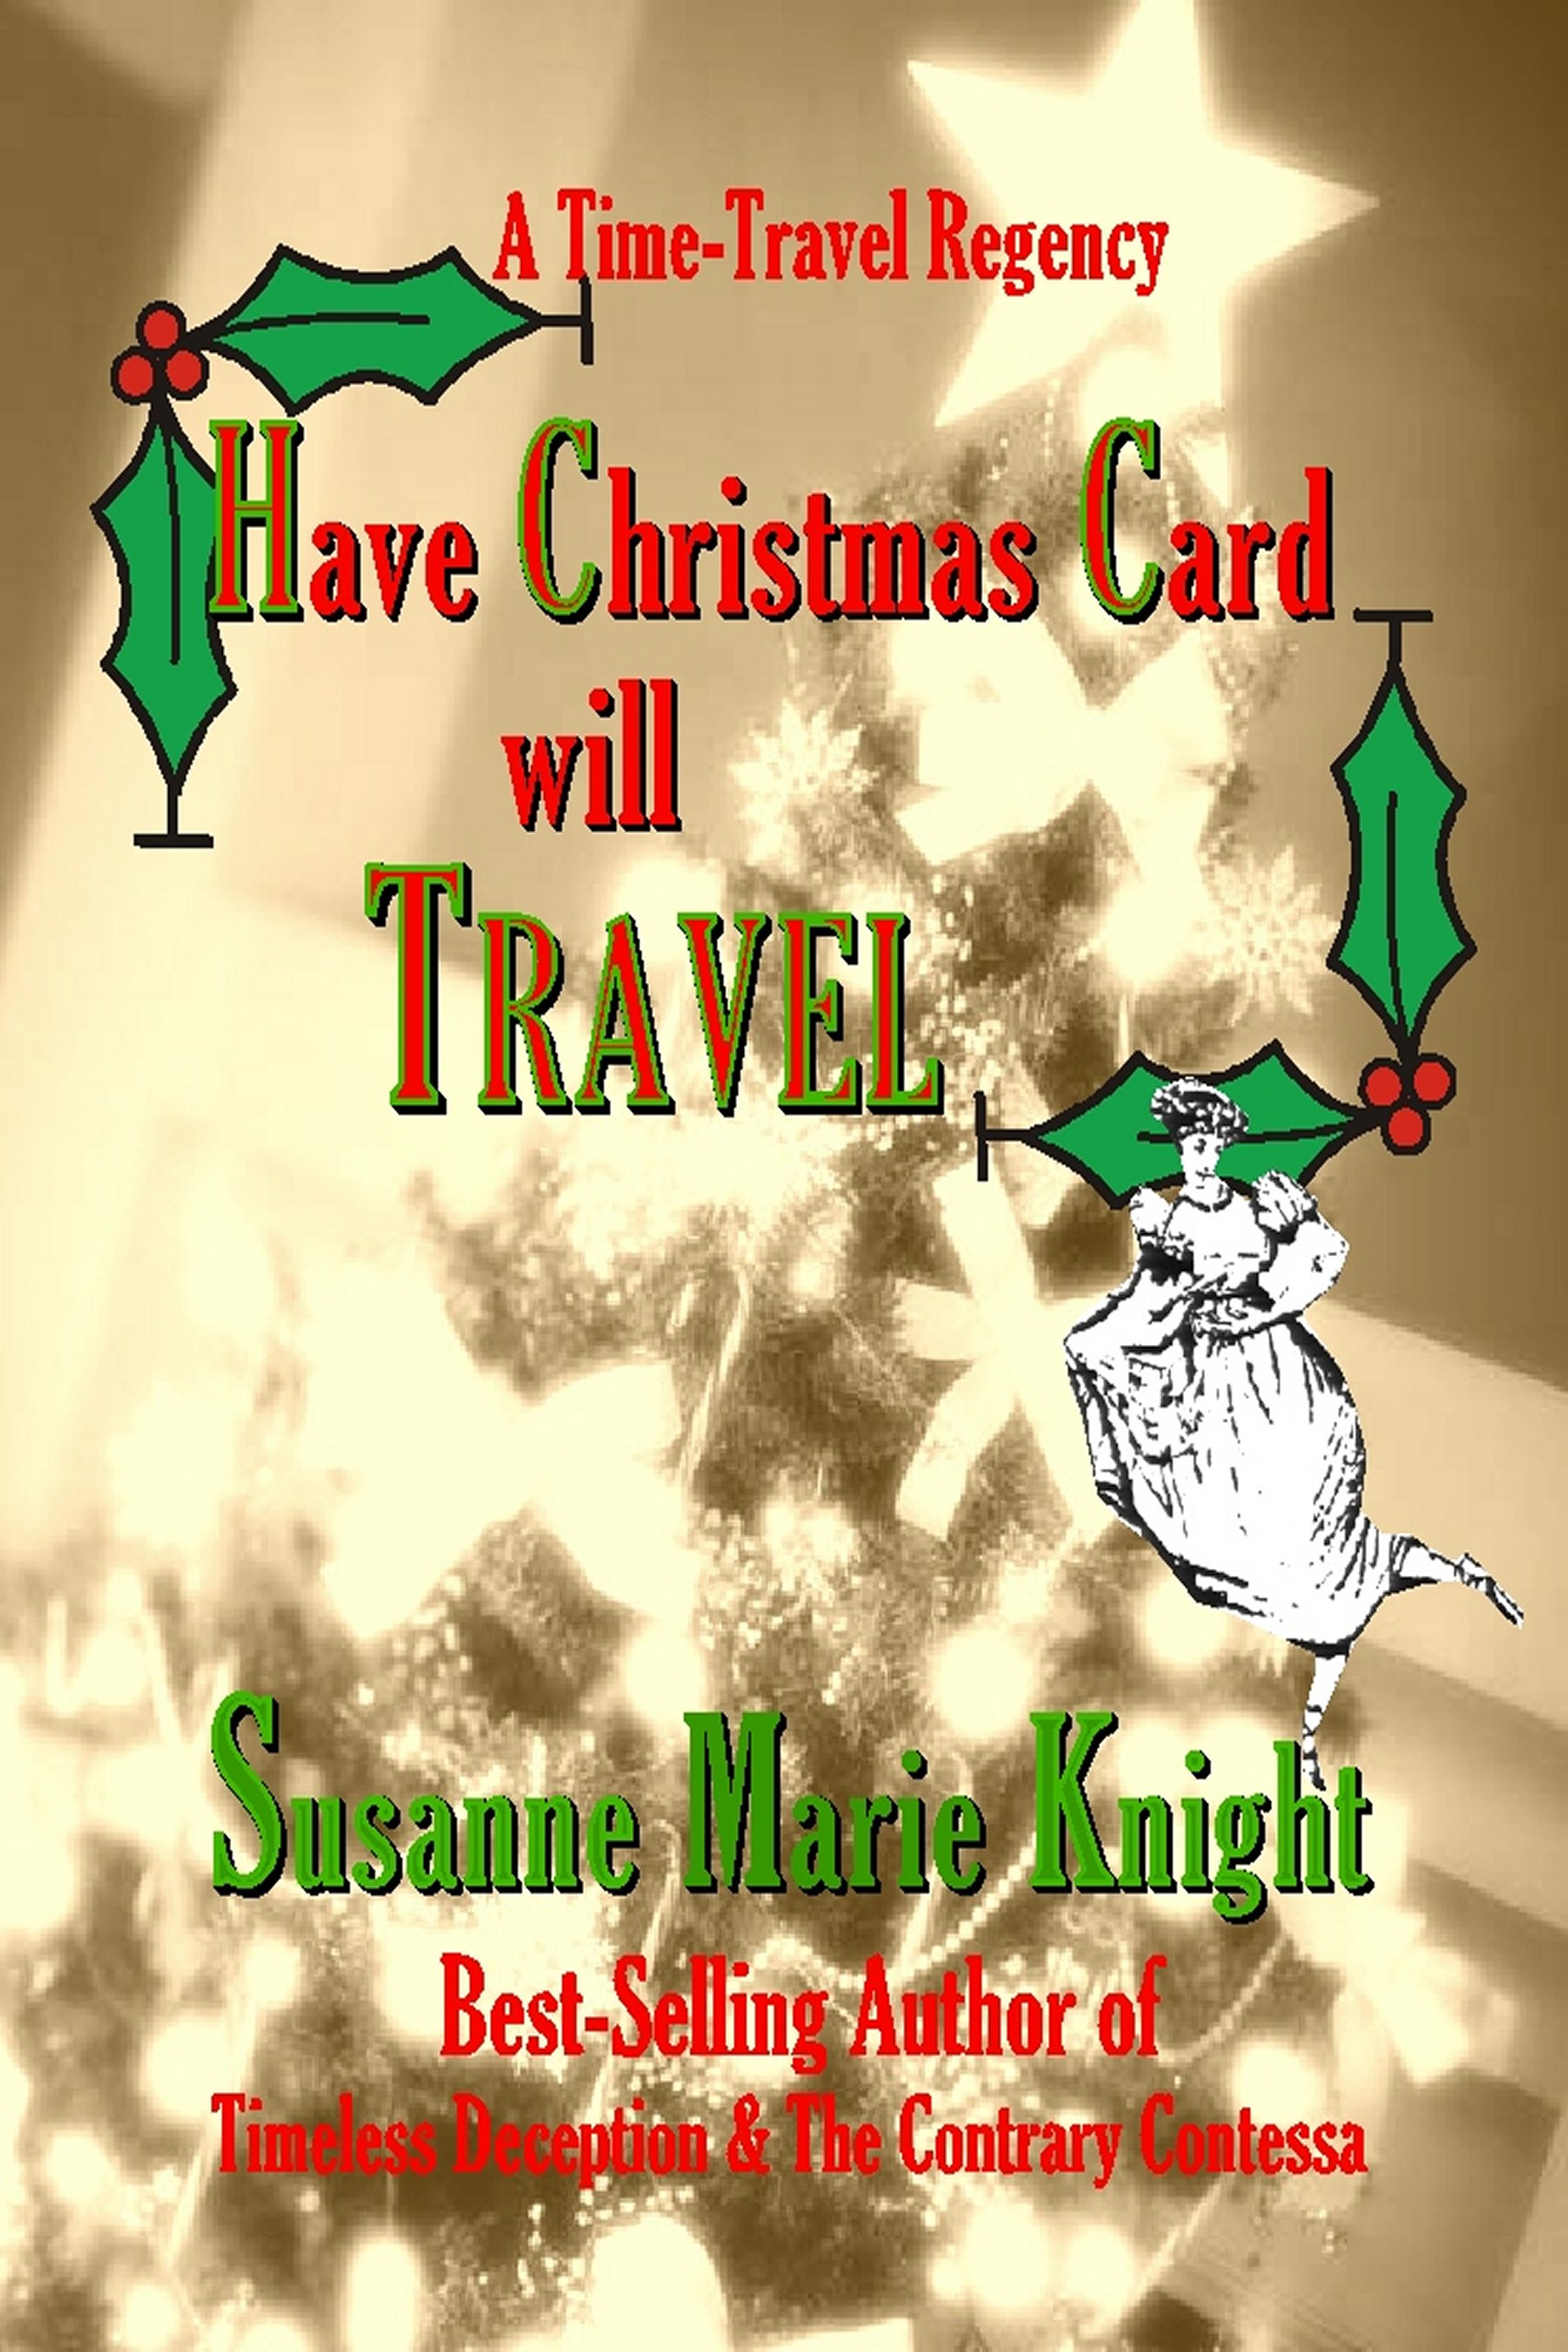 All About HAVE CHRISTMAS CARD WILL TRAVEL